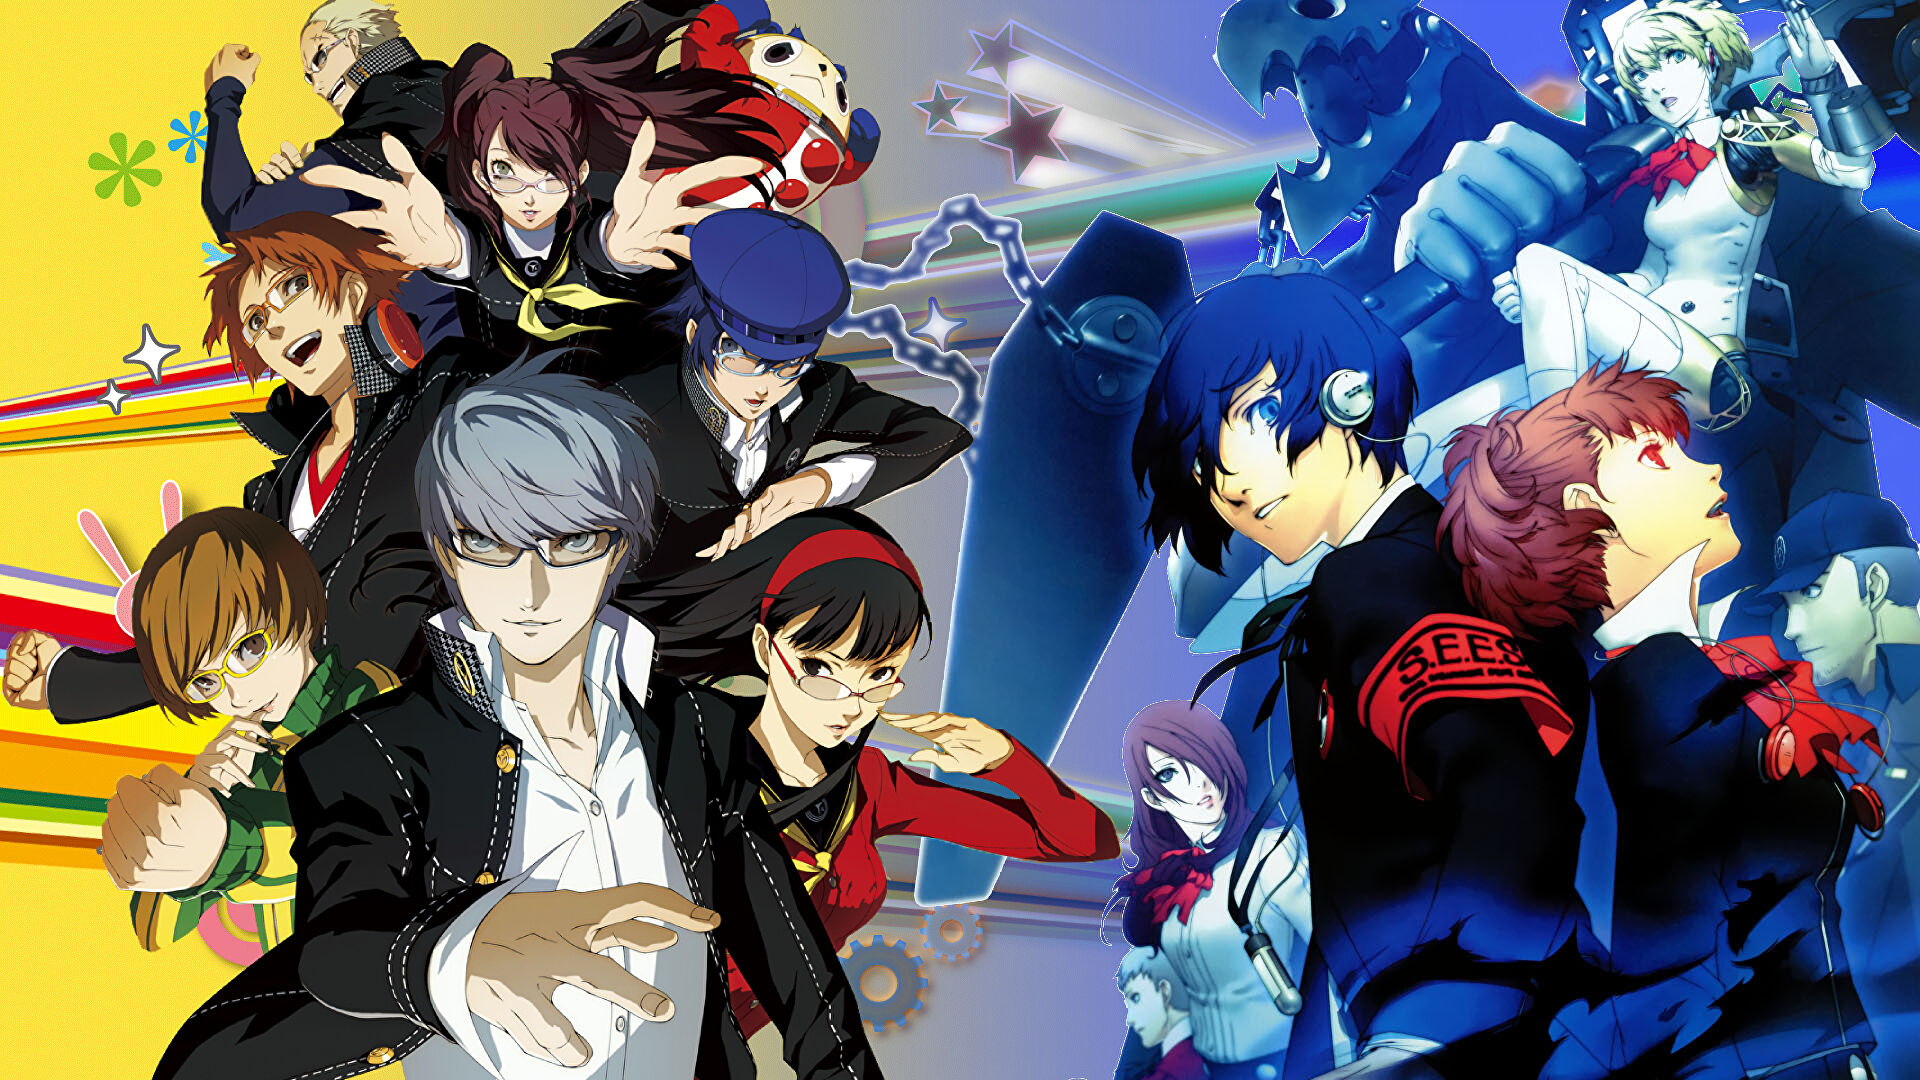 Persona 3 Portable and Persona 4 remasters handed a January release date